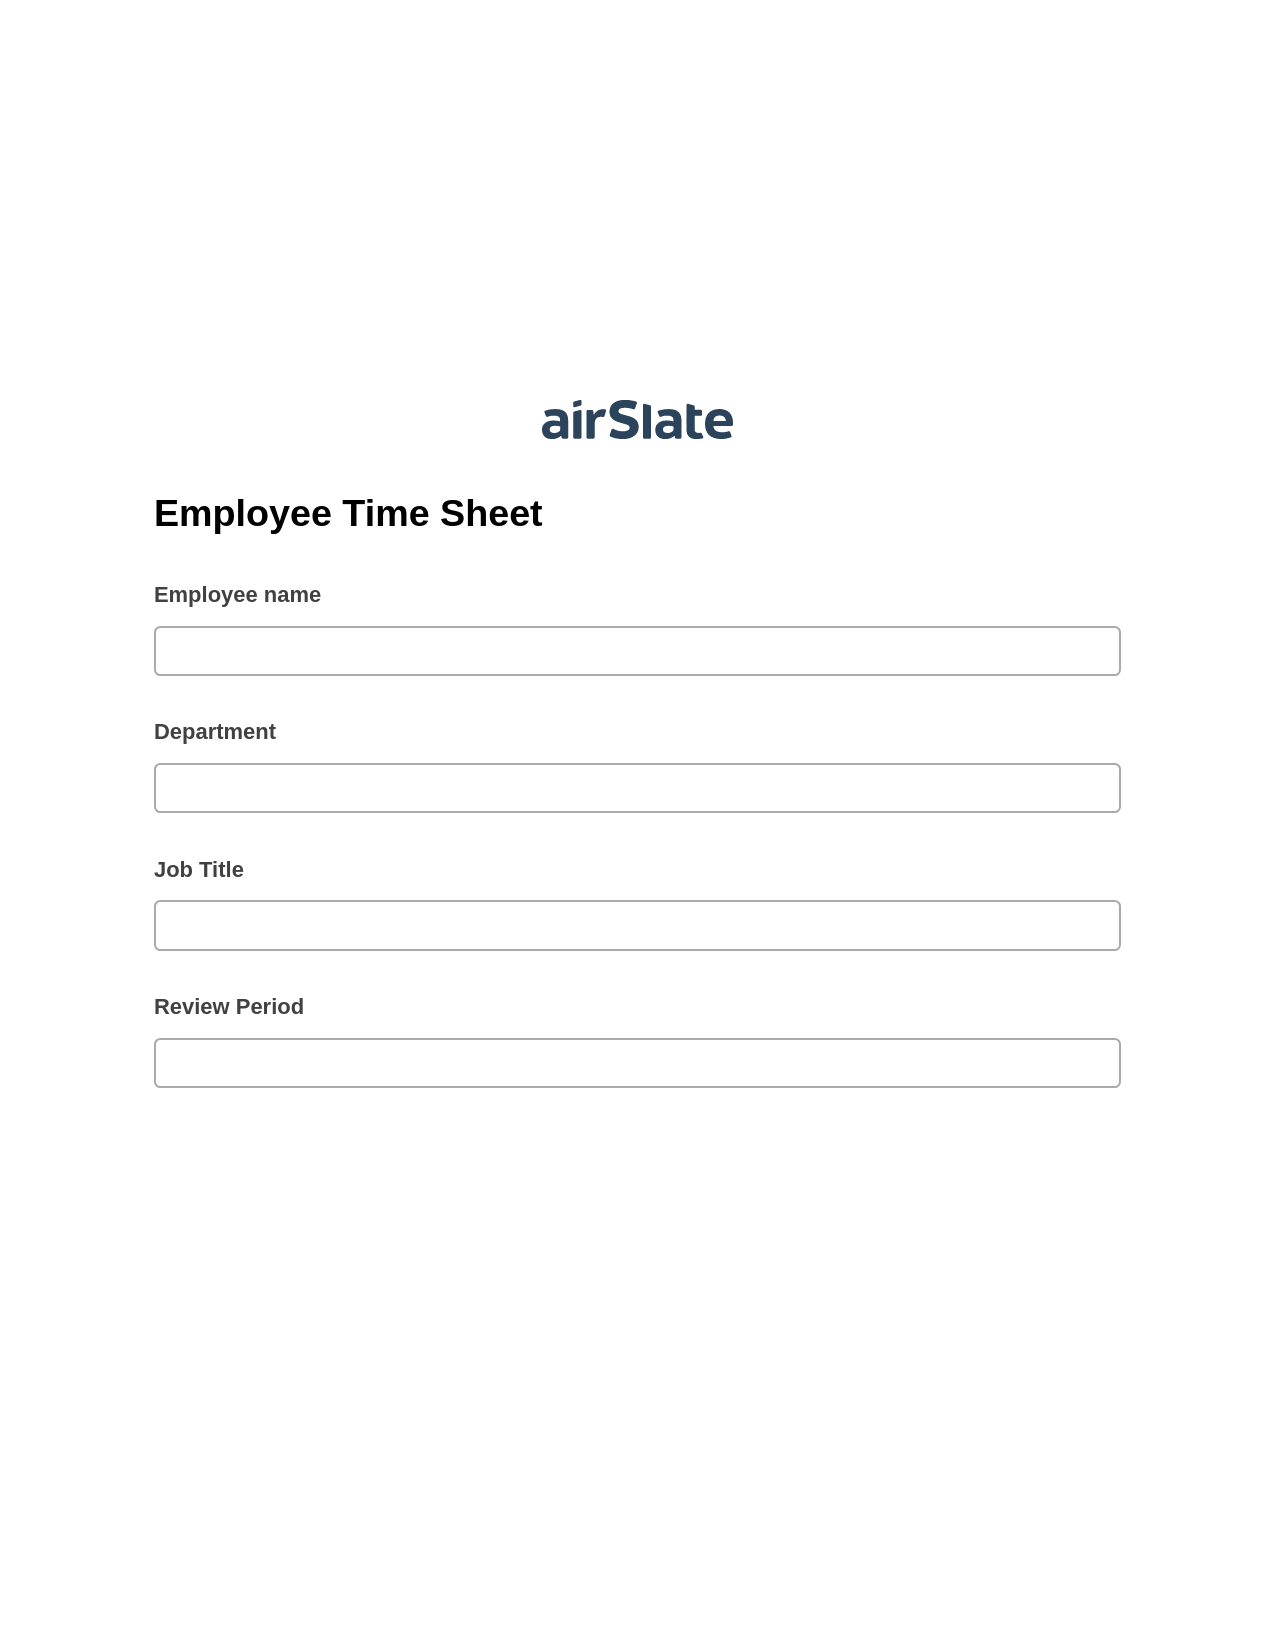 Employee Time Sheet System Bot - Slack Two-Way Binding Bot, Remove Tags From Slate Bot, Export to WebMerge Bot